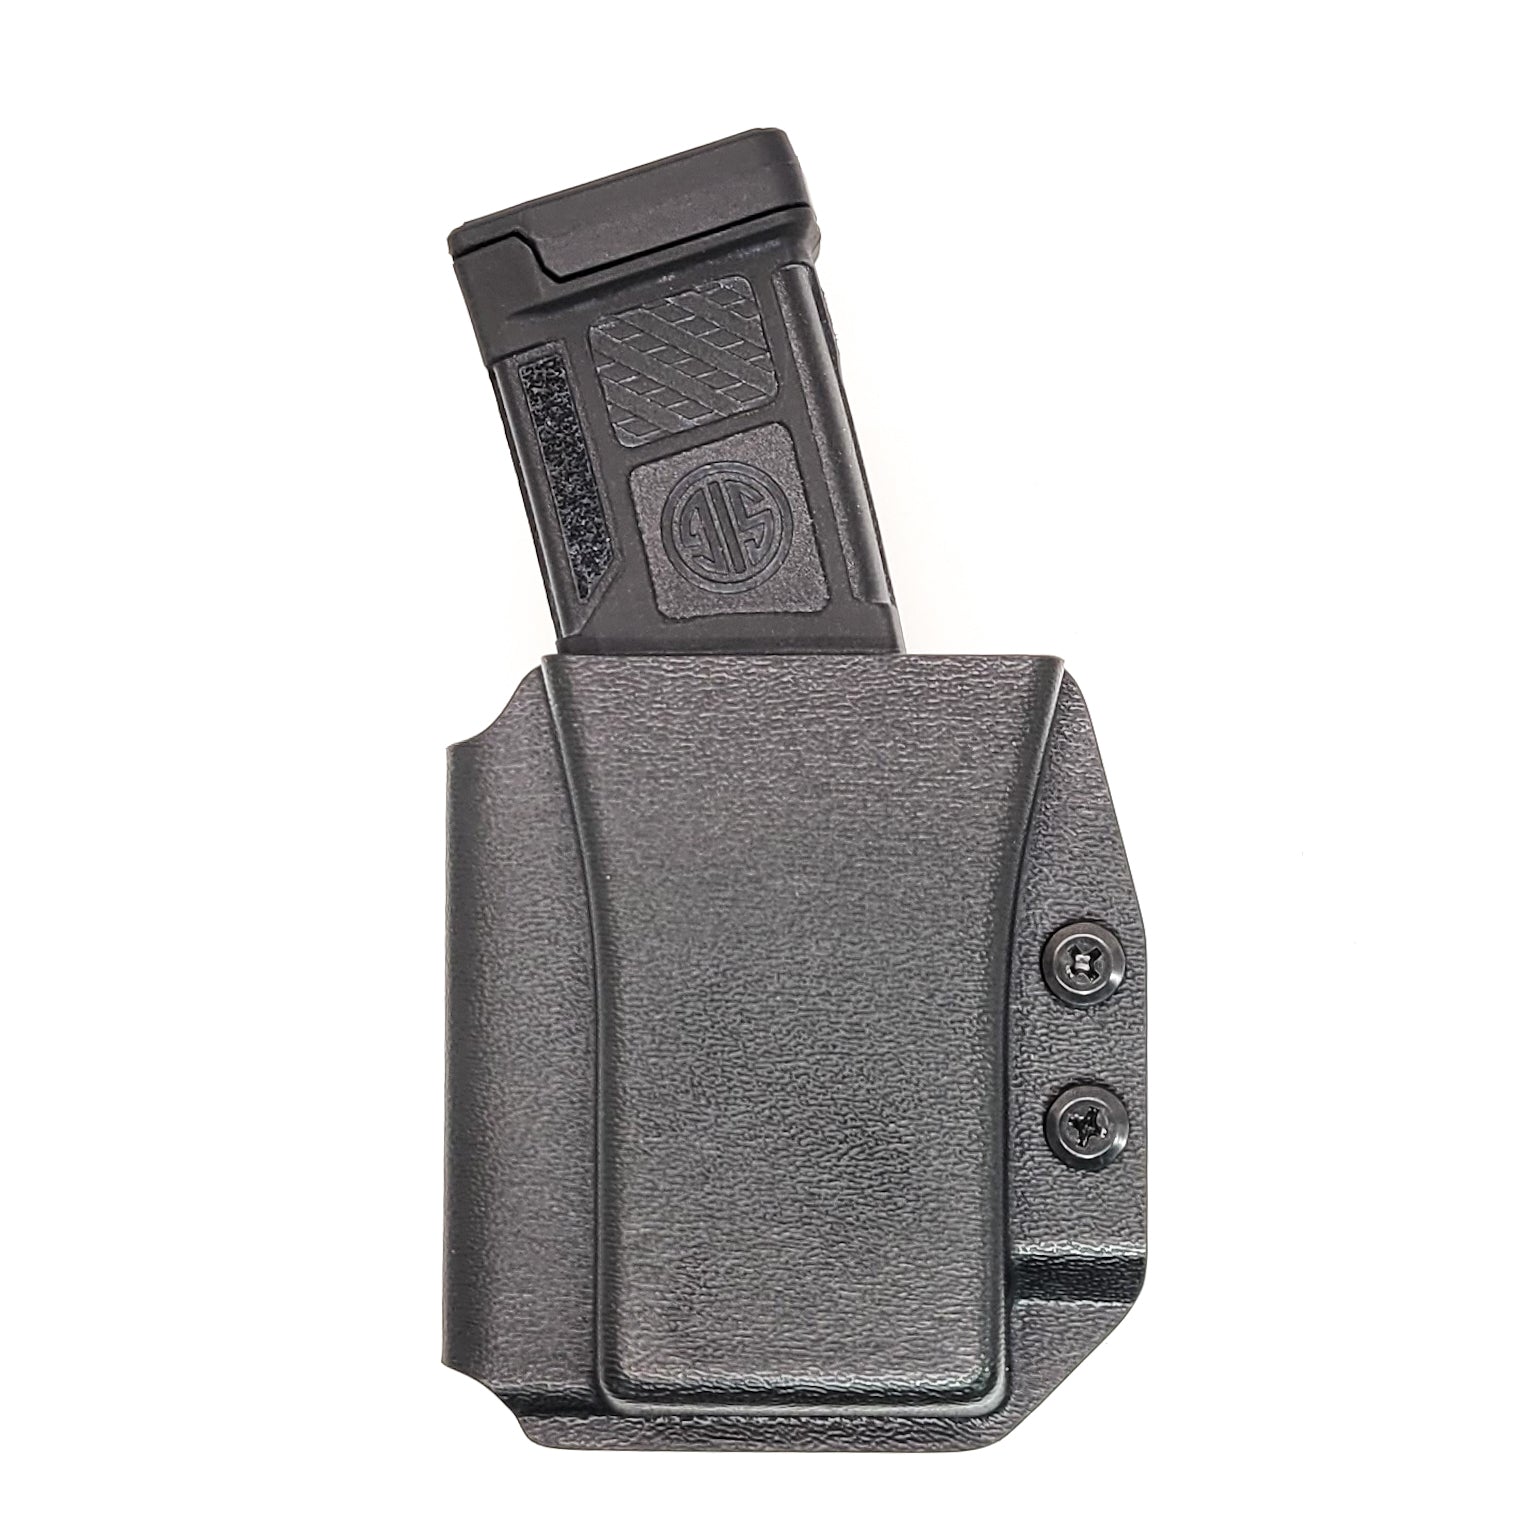 For the best OWB Sig Sauer MPX Magazine carrier of 2023, look no further than Four Brothers Inc.! Our MPX magazine holster is the perfect accessory for keeping your extra magazines secure and easily accessible. Keywords: competition, magazine holster, bullets forward, bullets back, range day, everyday carry, firearms.